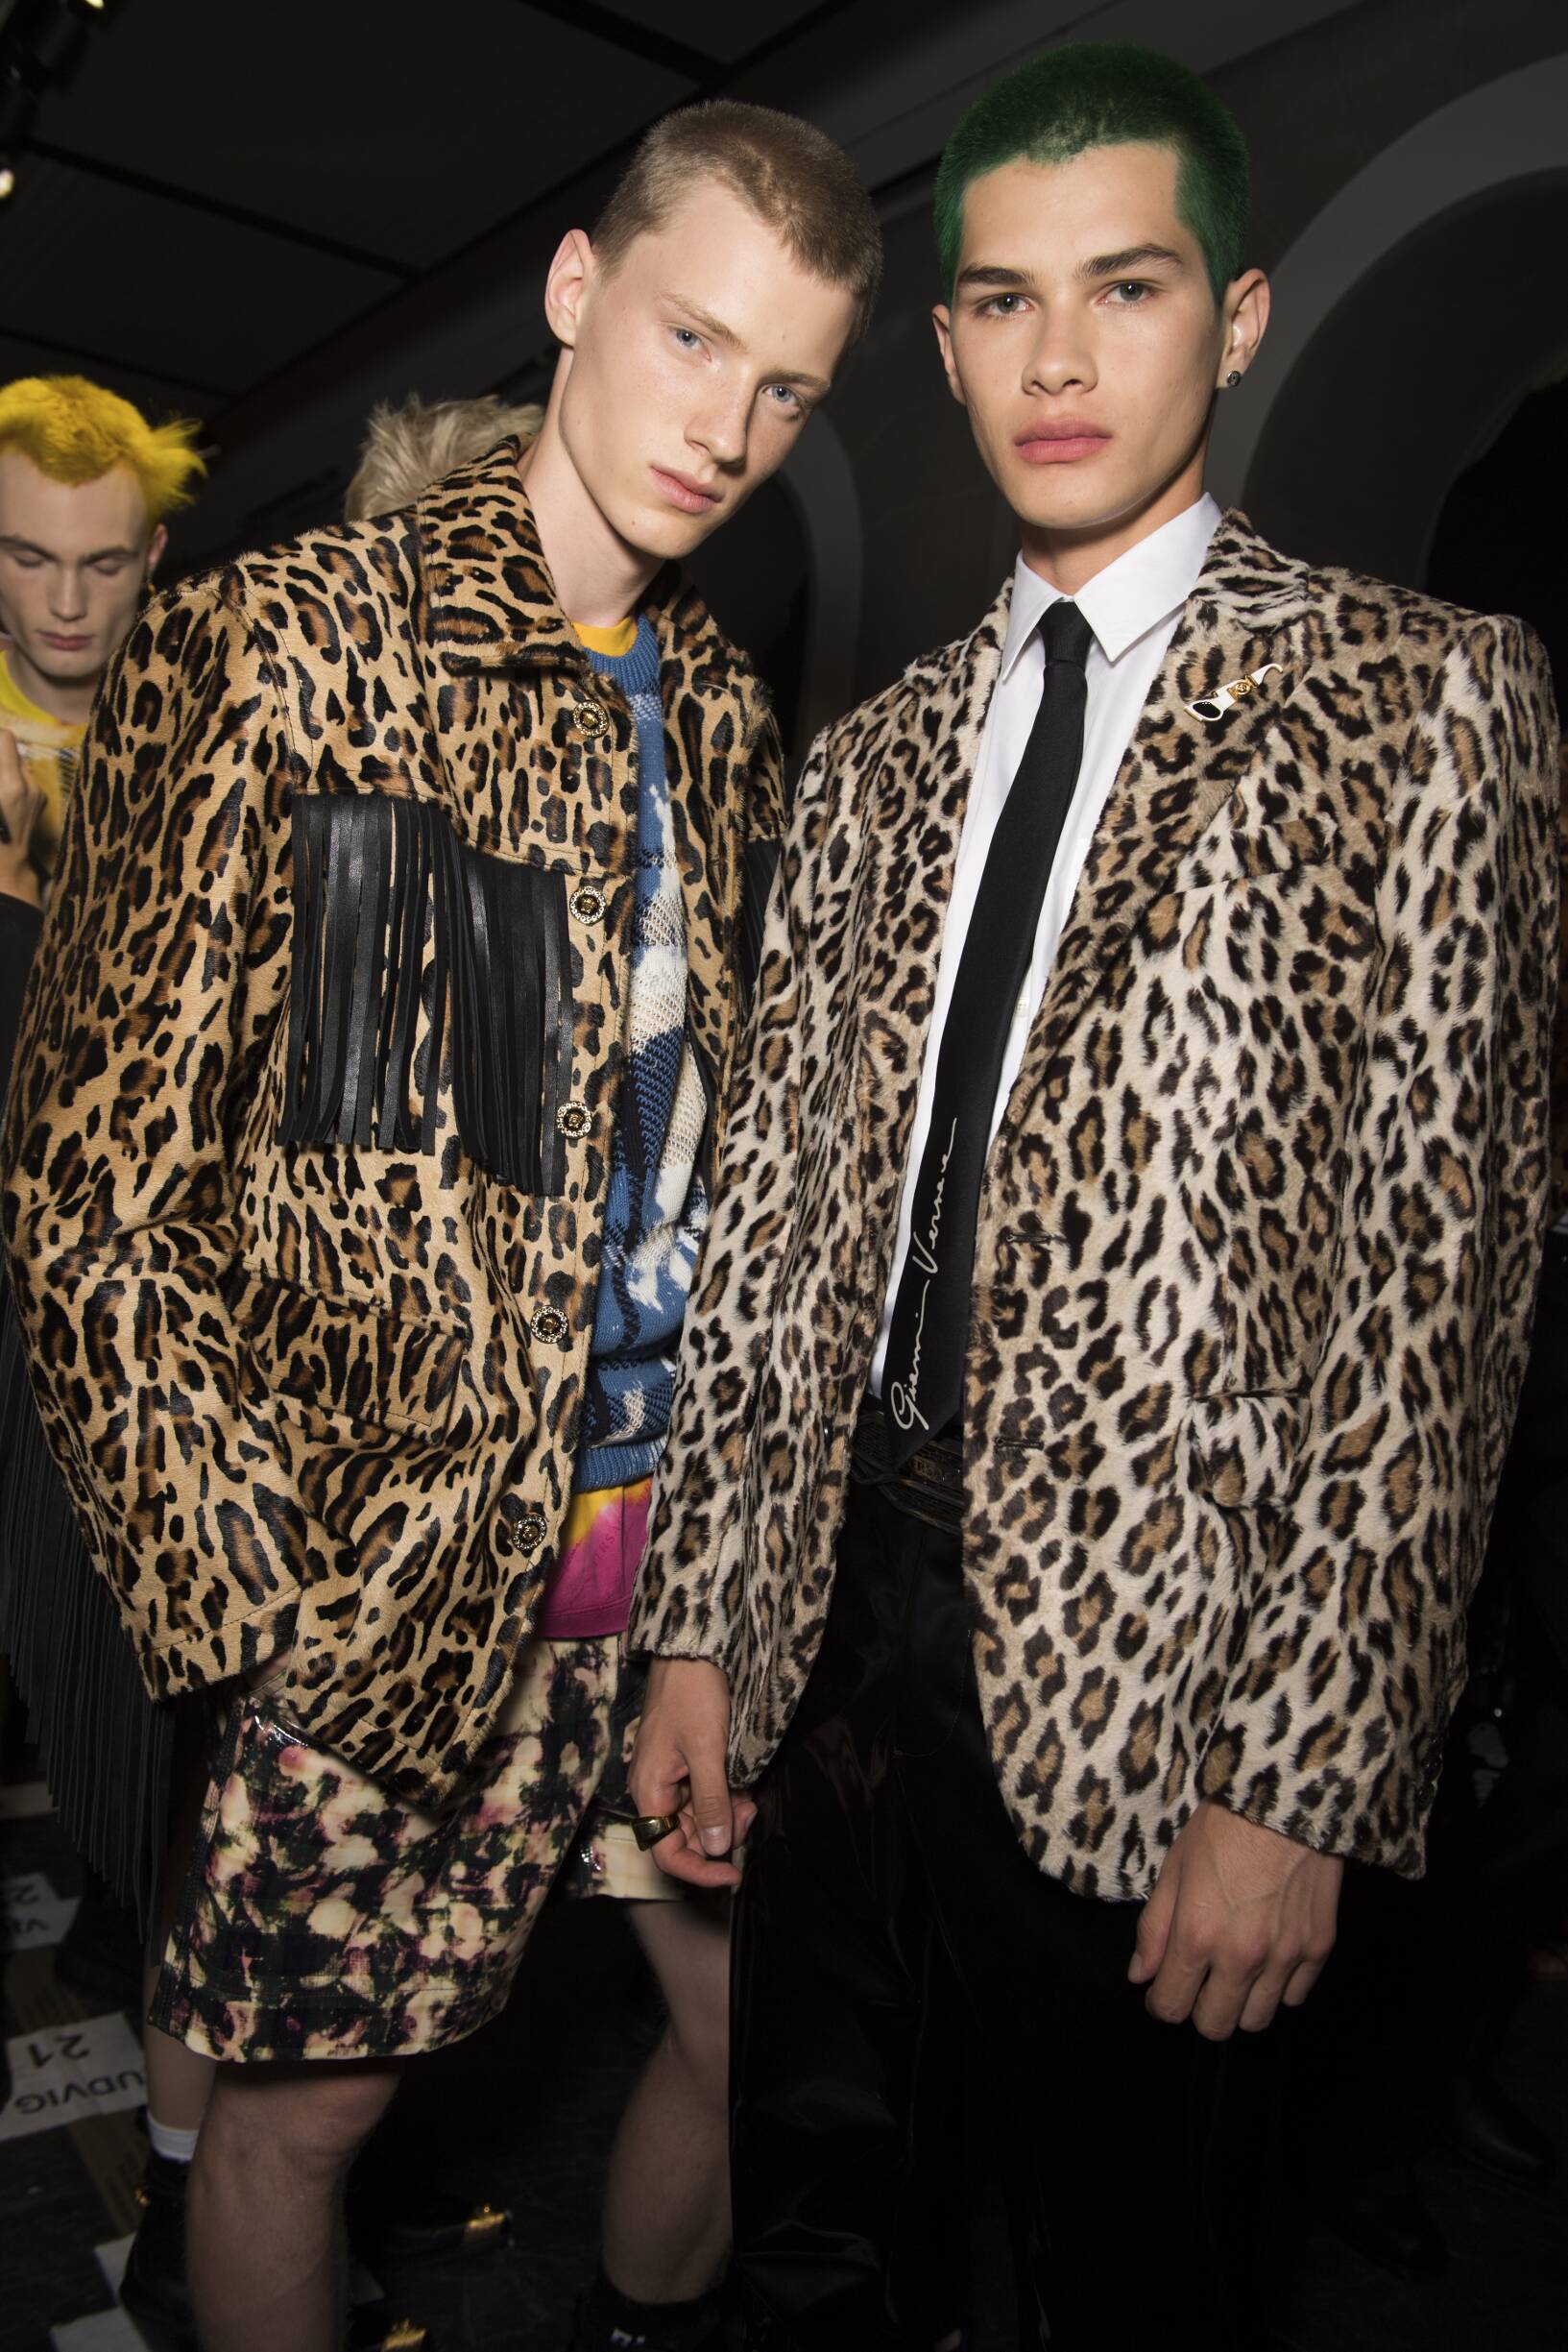 BACKSTAGE VERSACE 2020 SS MEN’S COLLECTION | The Skinny Beep